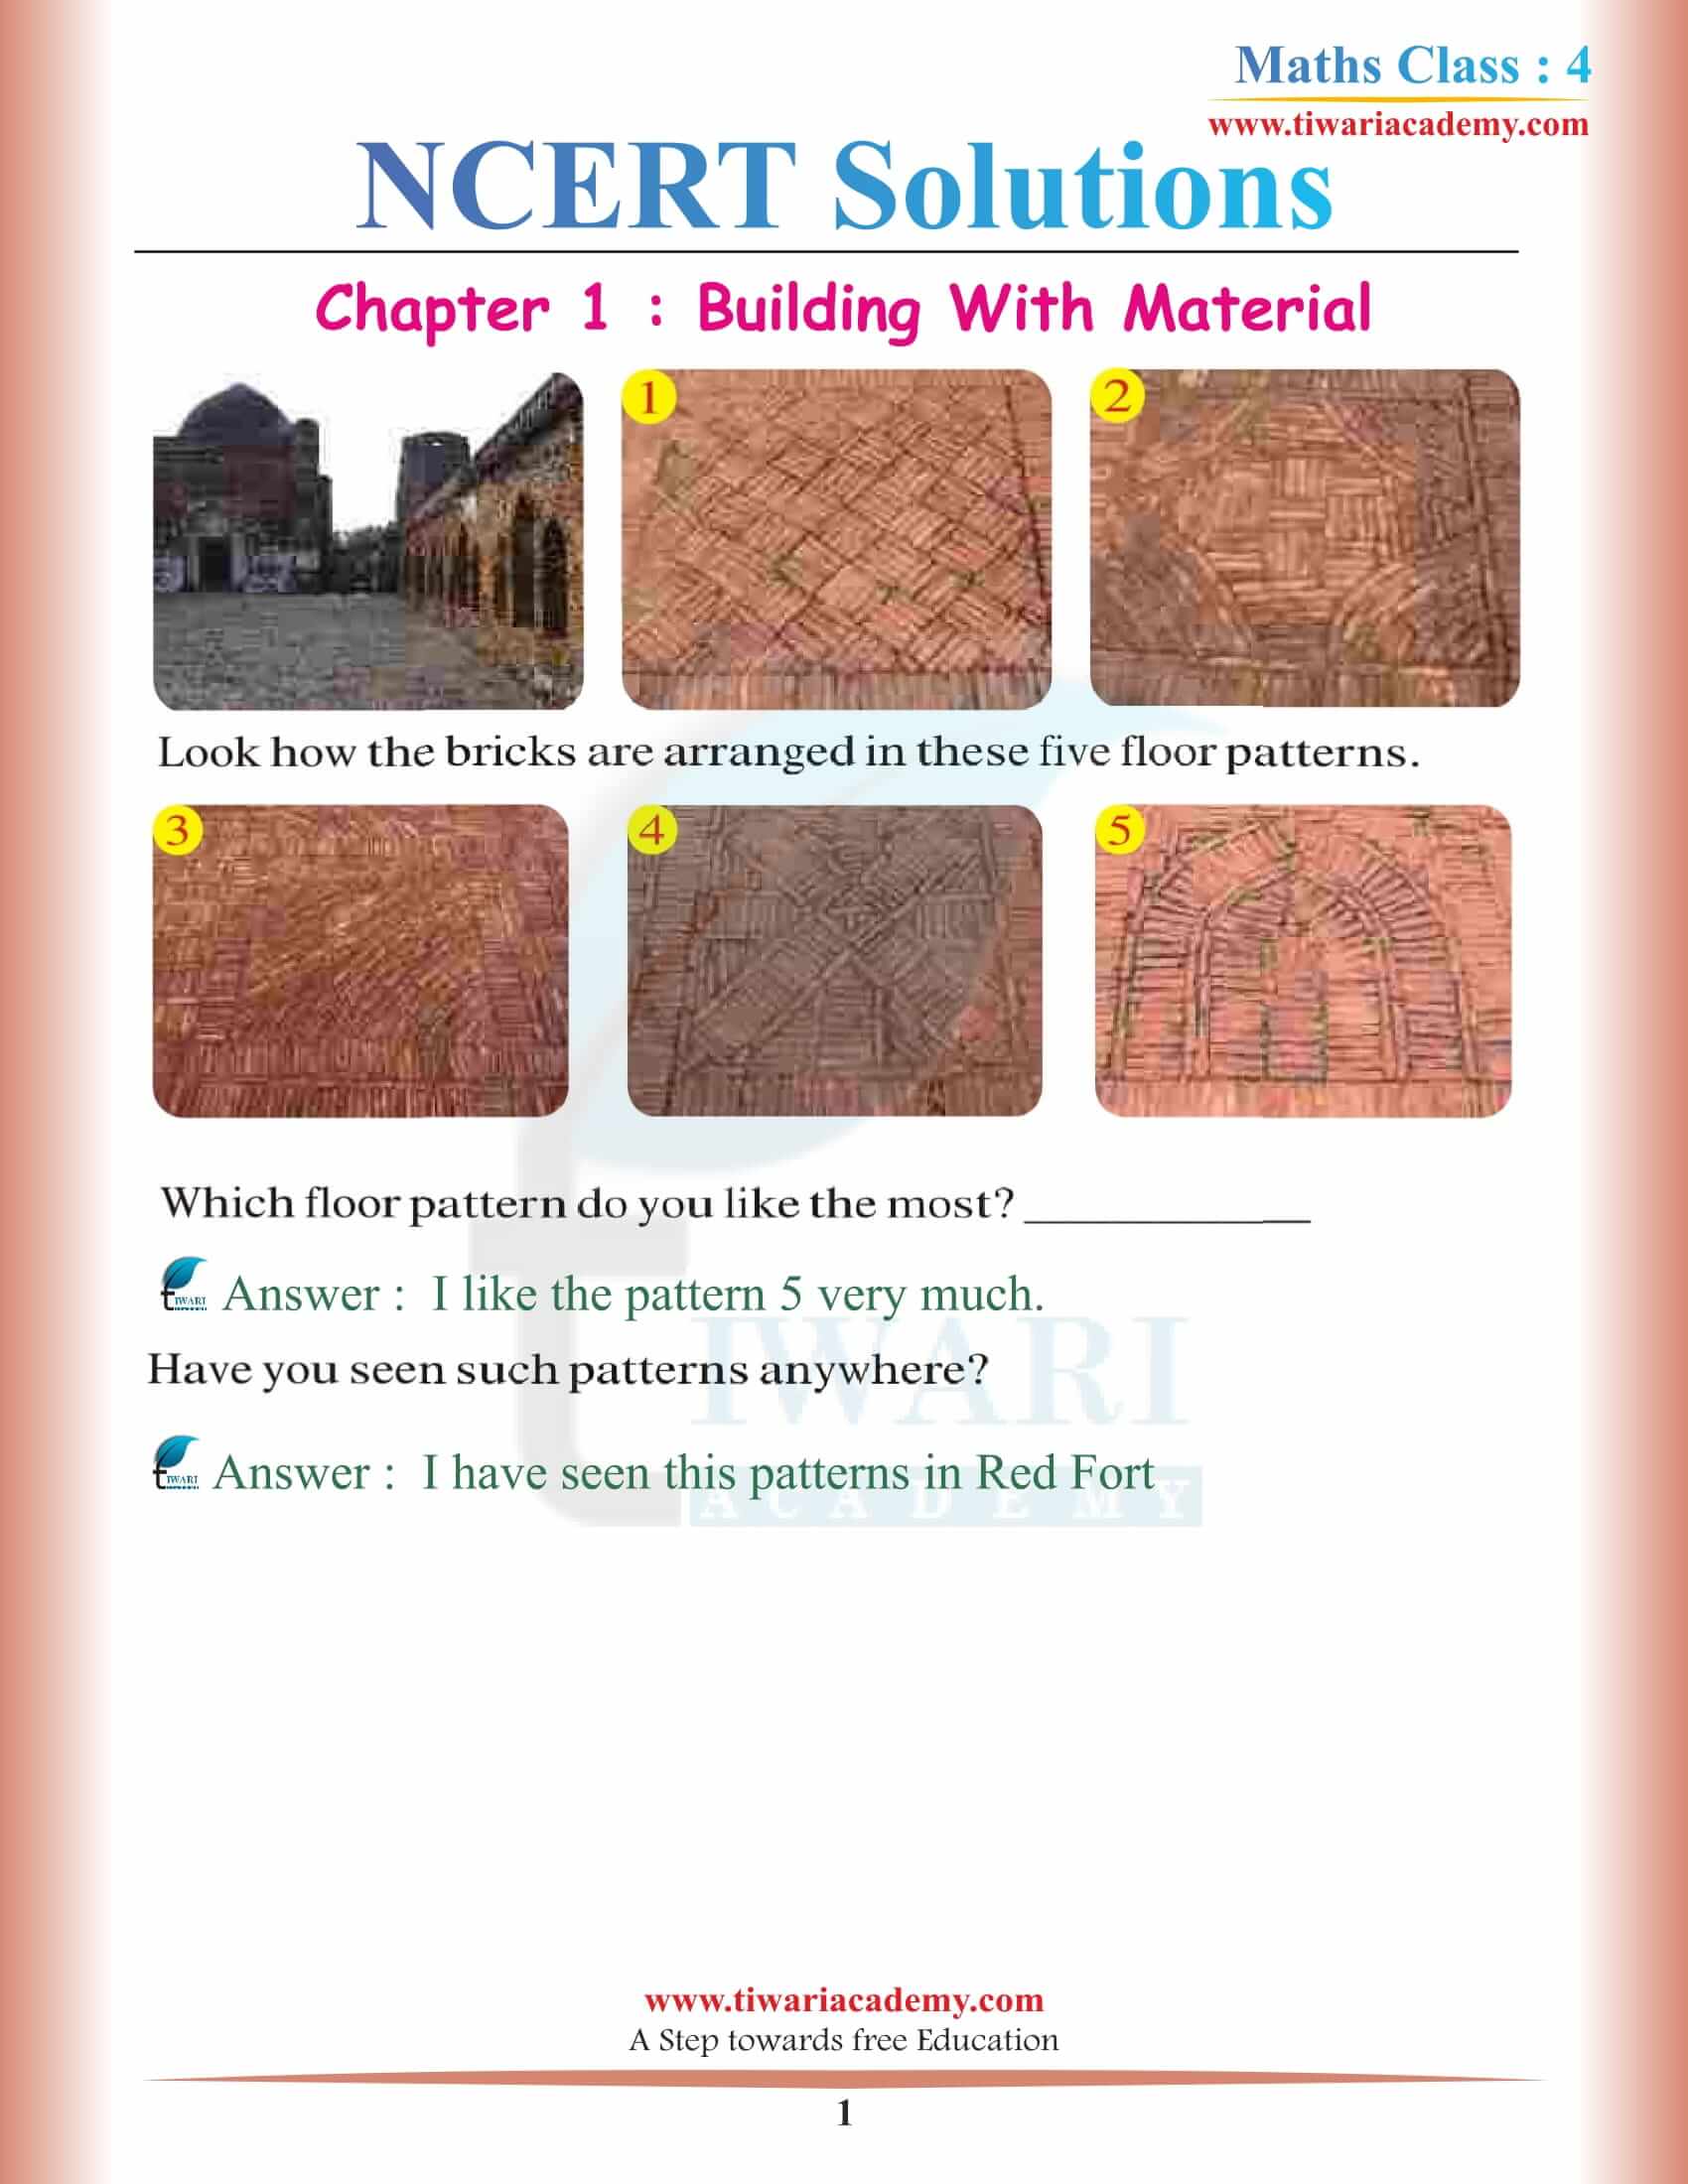 NCERT Solutions for Class 4 Maths Chapter 1 Building with Bricks